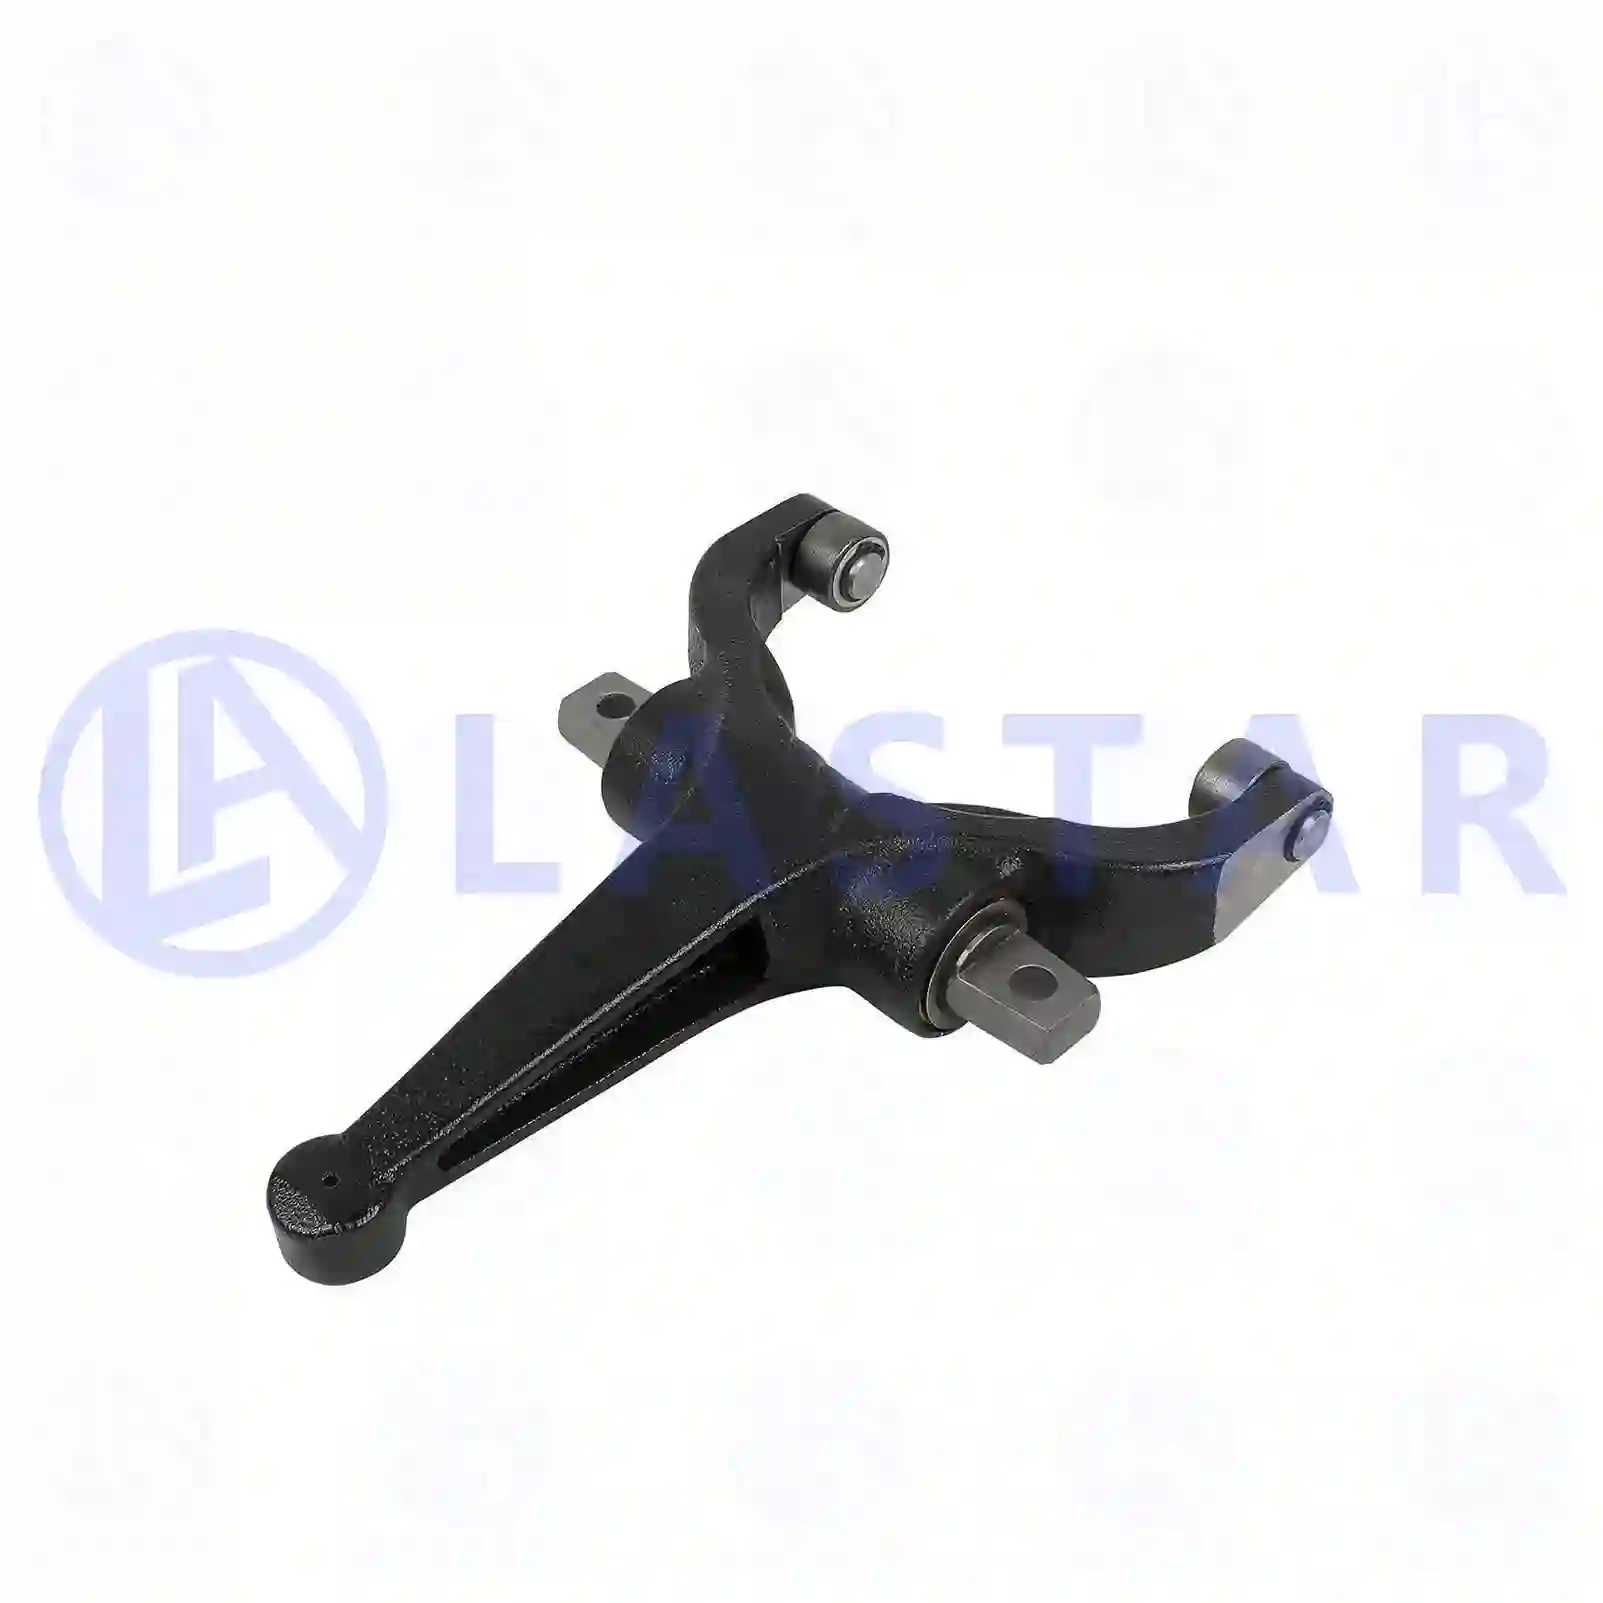 Release fork, 77723147, 1773620 ||  77723147 Lastar Spare Part | Truck Spare Parts, Auotomotive Spare Parts Release fork, 77723147, 1773620 ||  77723147 Lastar Spare Part | Truck Spare Parts, Auotomotive Spare Parts